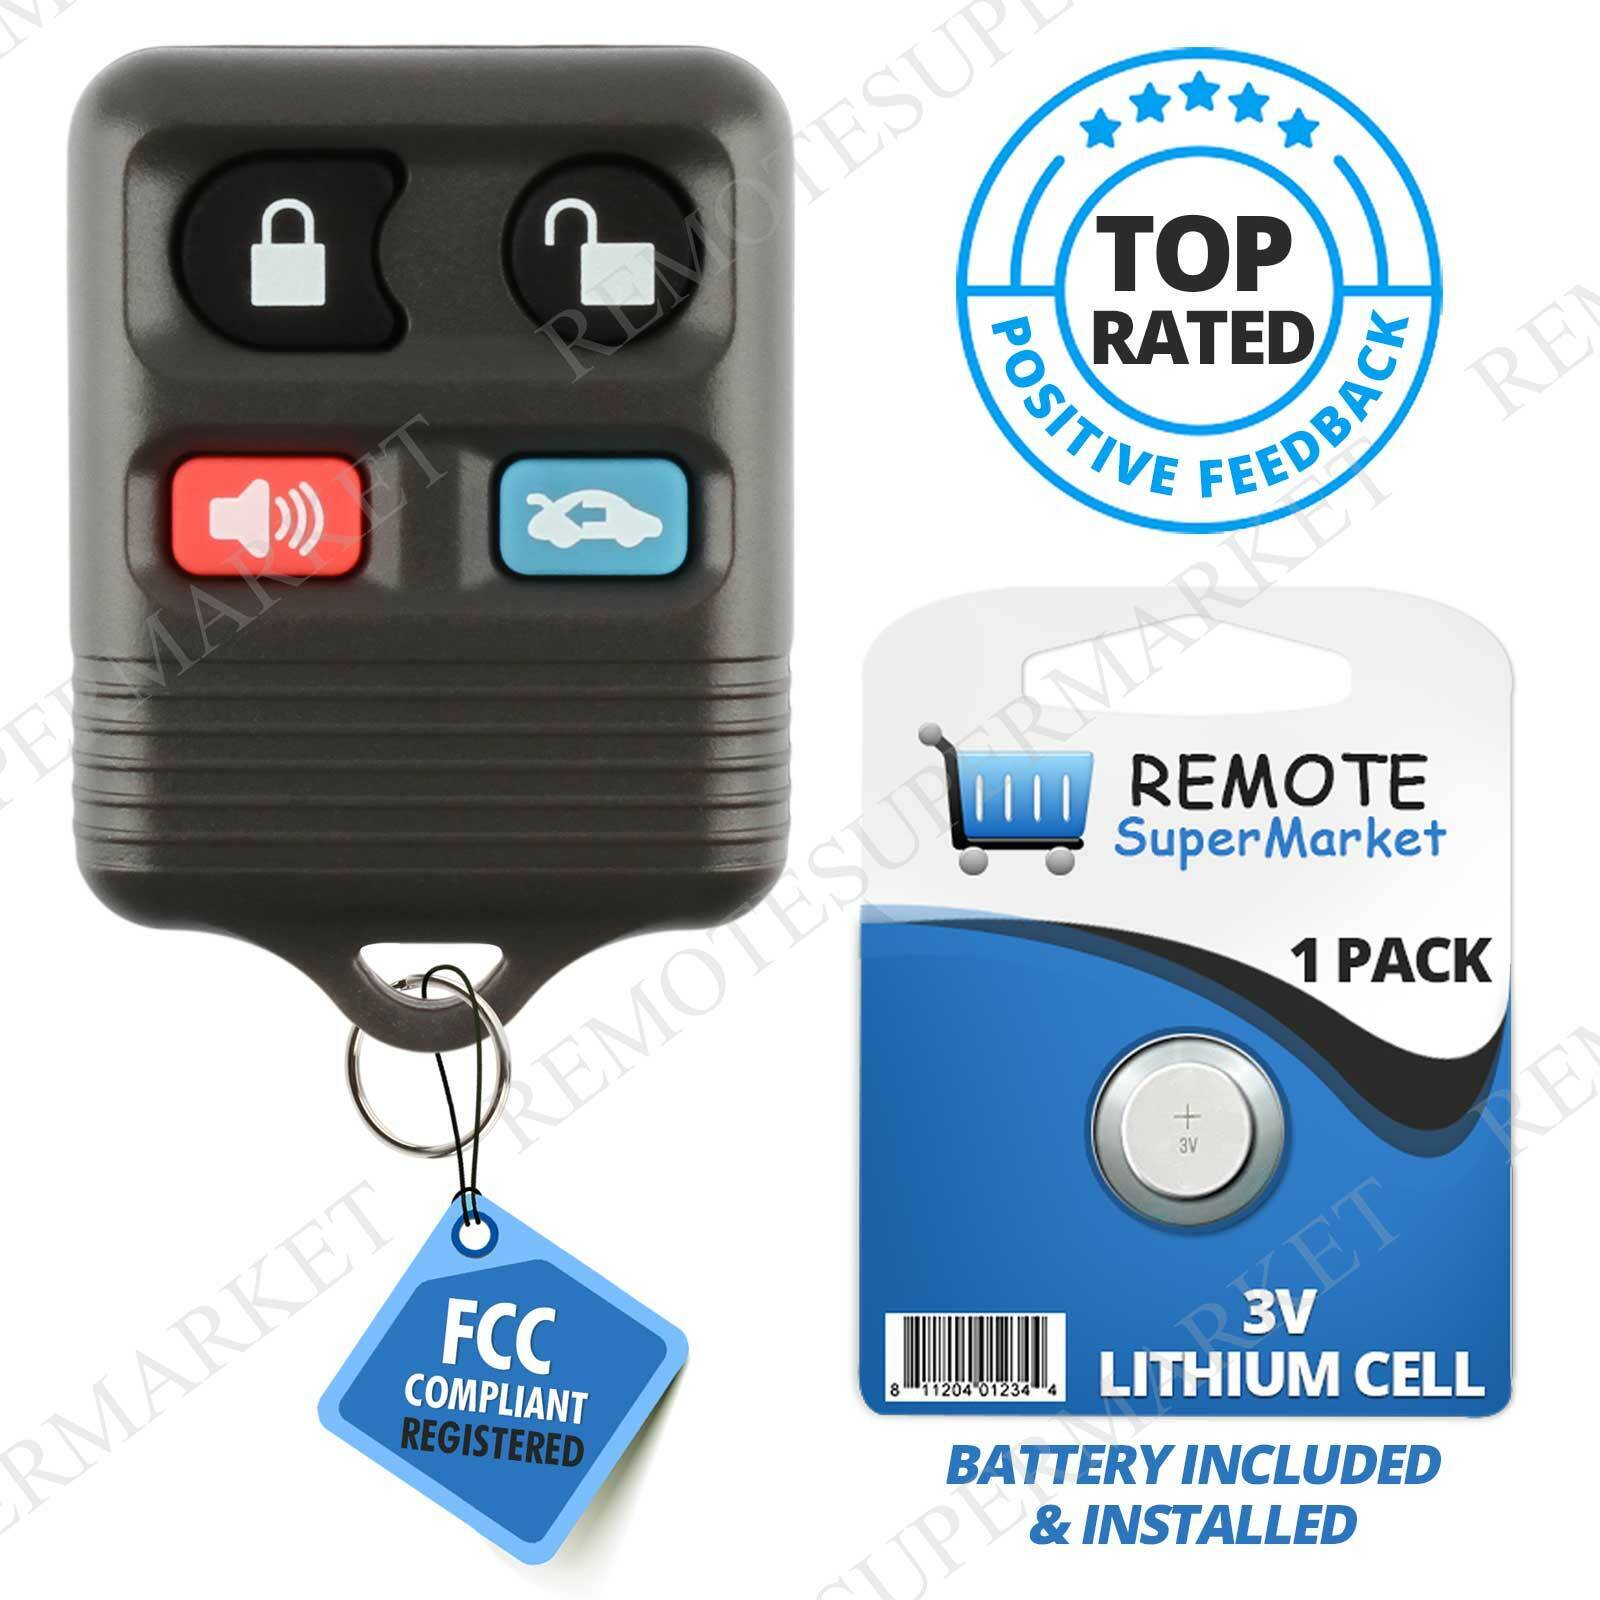 Replacement for 1995-2006 Mercury Grand Marquis Remote Car Keyless Entry Key Fob